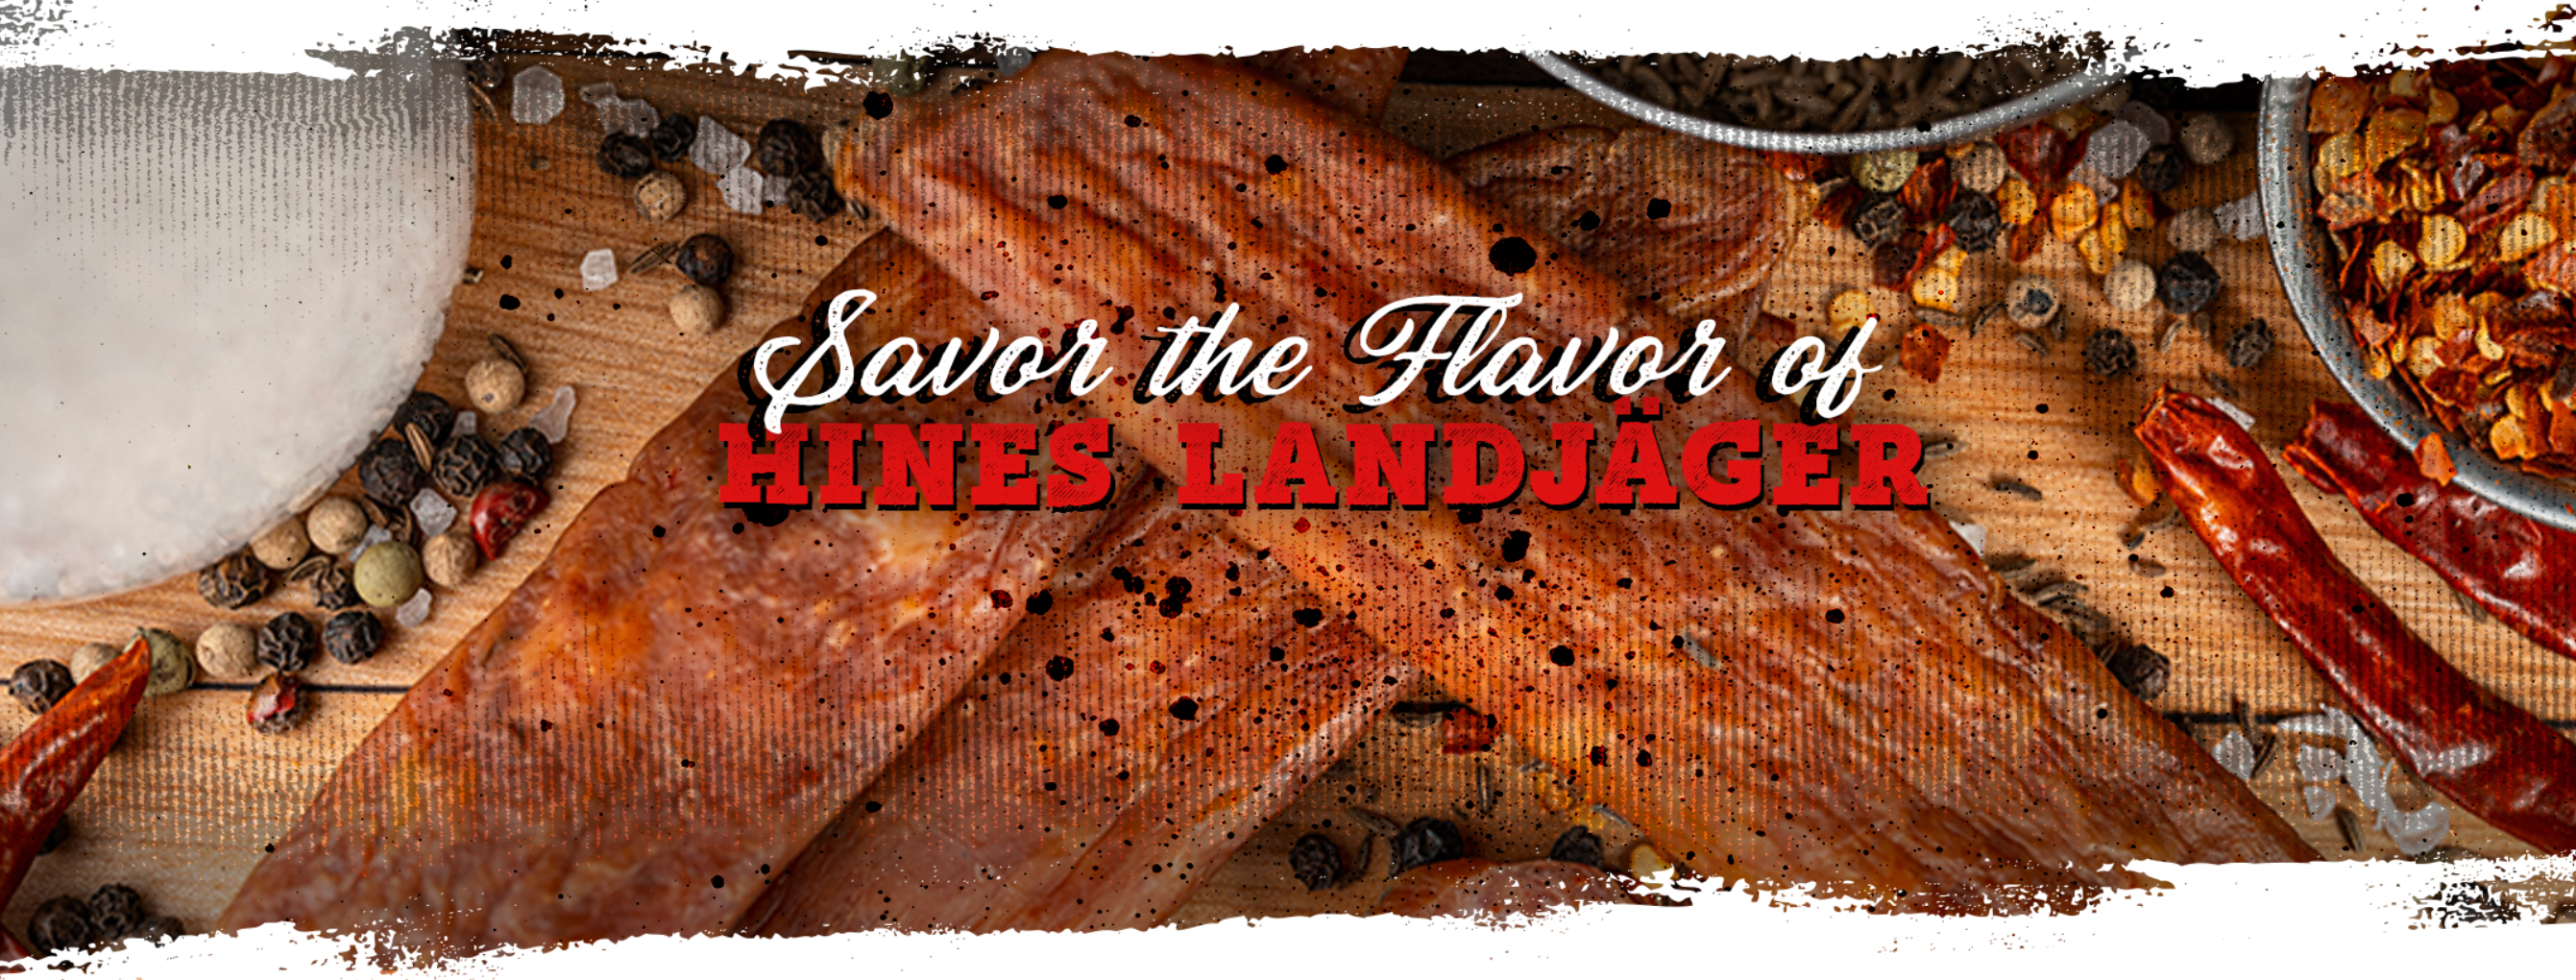 SAVOR THE FLAVOR OF HINES LANDJAGER! Discover a world of exceptional flavors at Hines Meat Co., proudly recognized as Oregon’s Best Butcher Shop. We bring you a premium selection of fresh meats alongside irresistible snack sticks, beef jerky, and summer sausage to satisfy your every craving. Fresh Meat, Snack Sticks, Beef Jerky, Summer Sausage l ORDER NOW